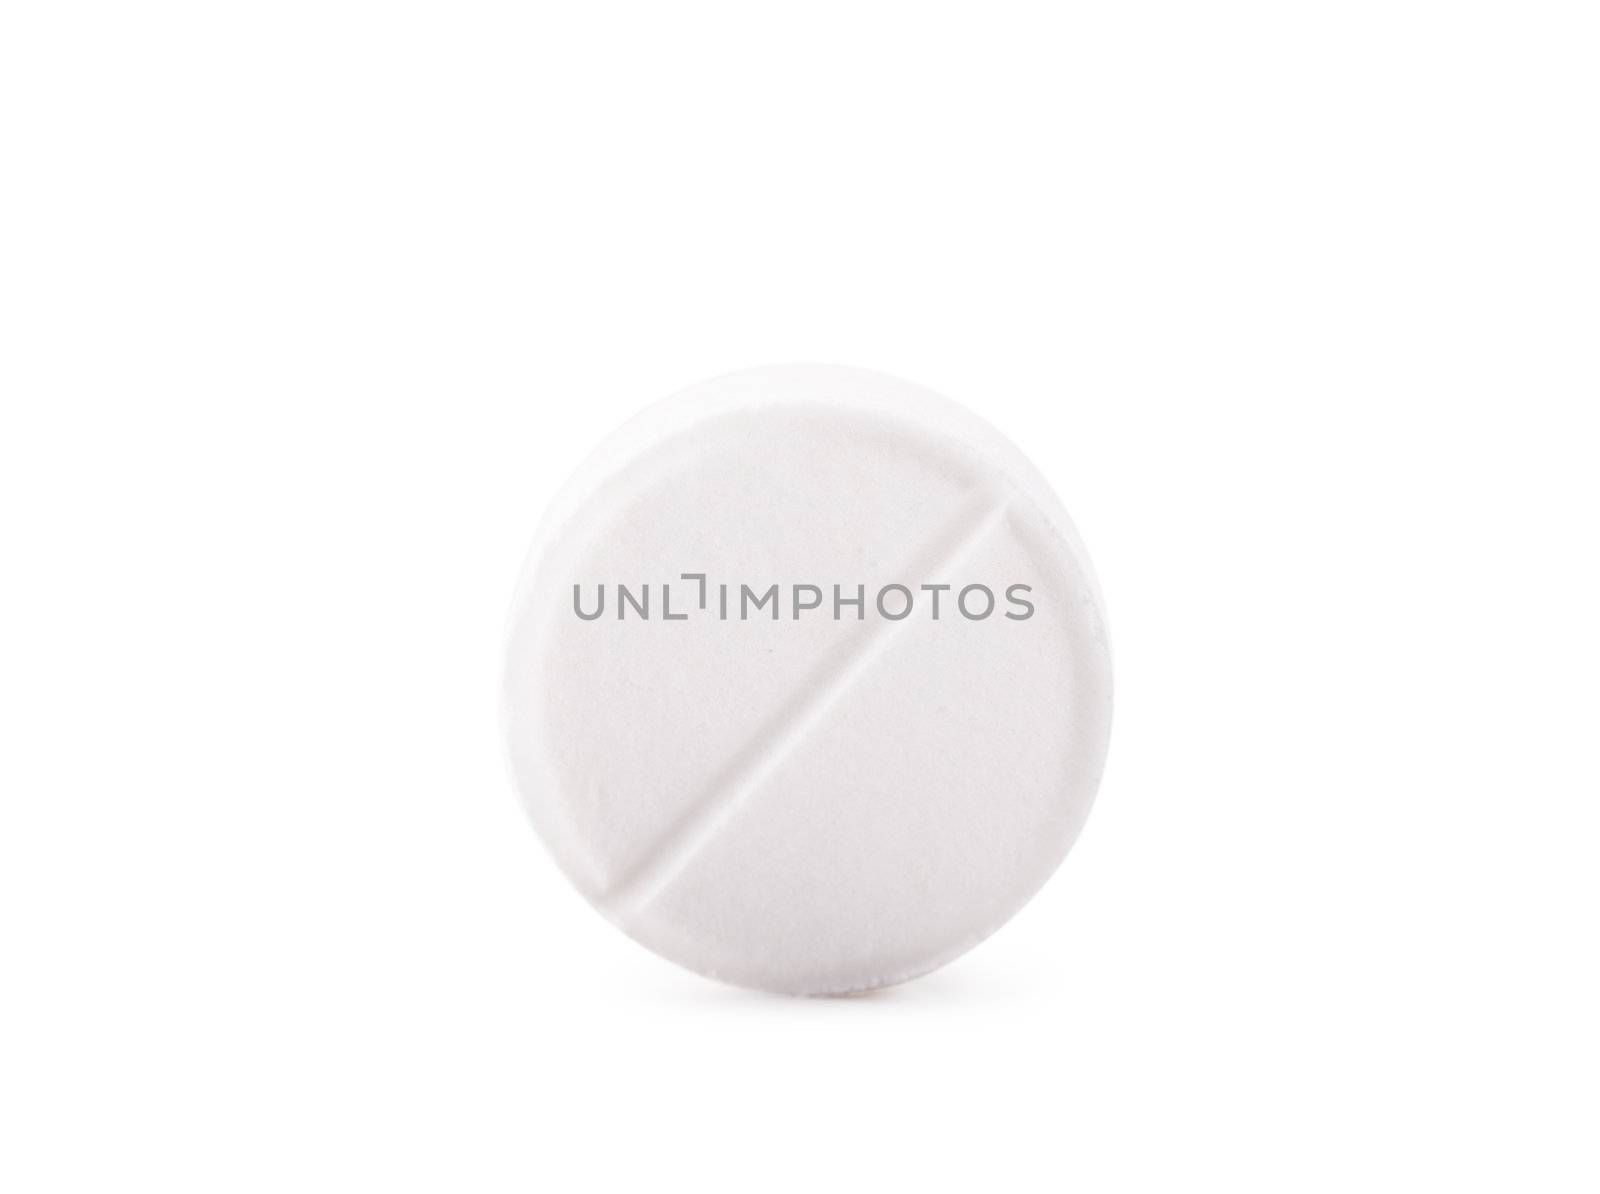 Macro view of white pill on a white background